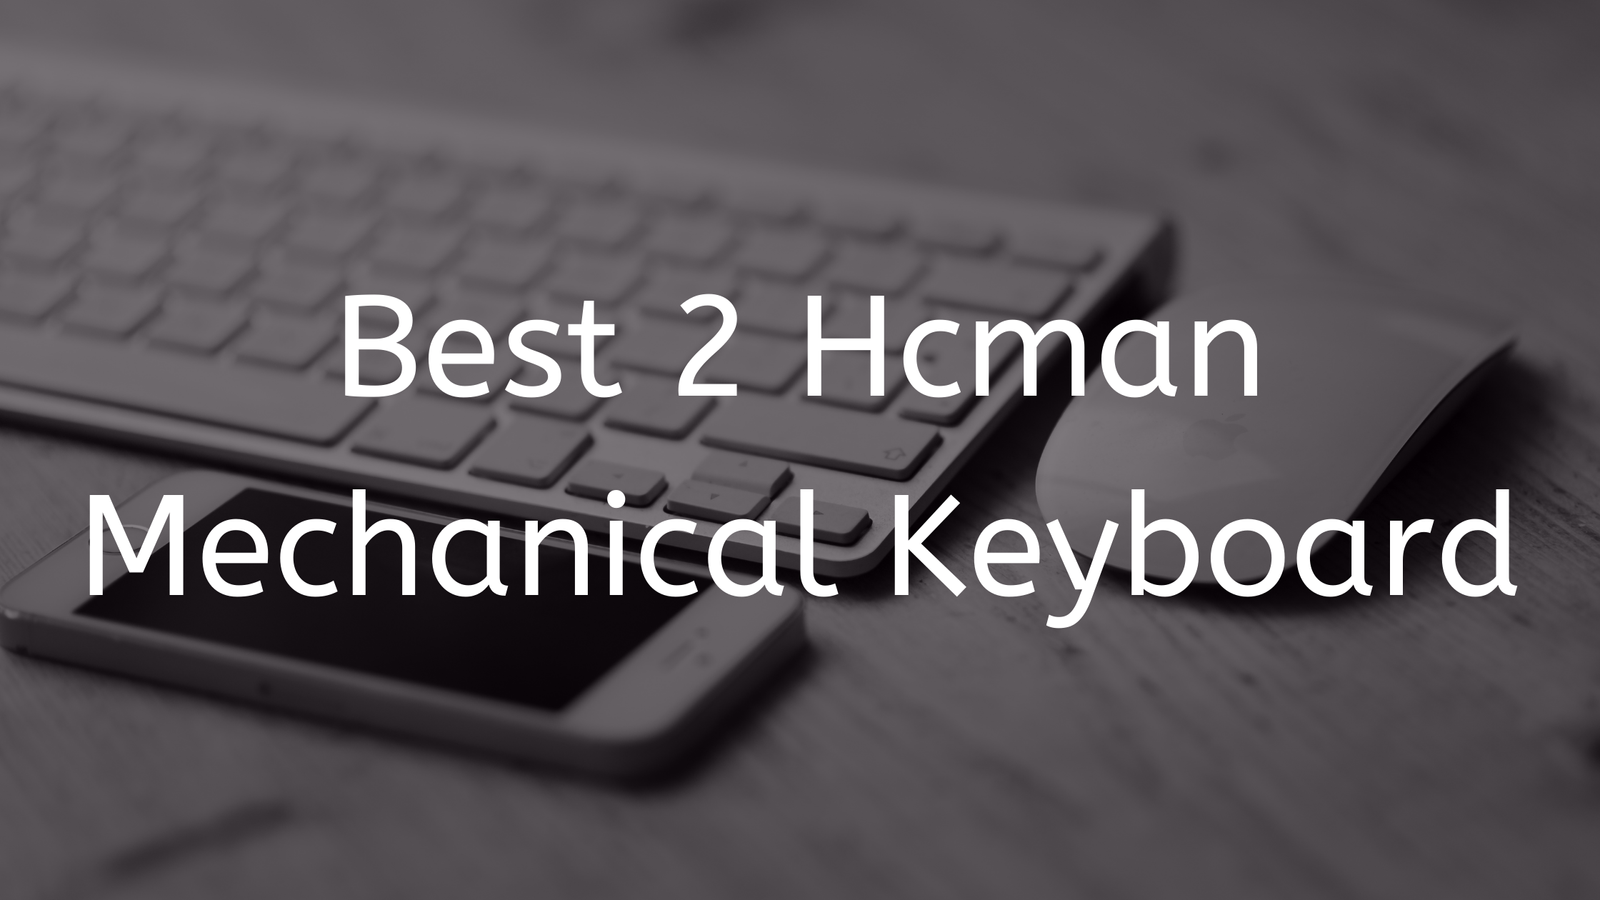 You are currently viewing Best 2 Hcman Mechanical Keyboard